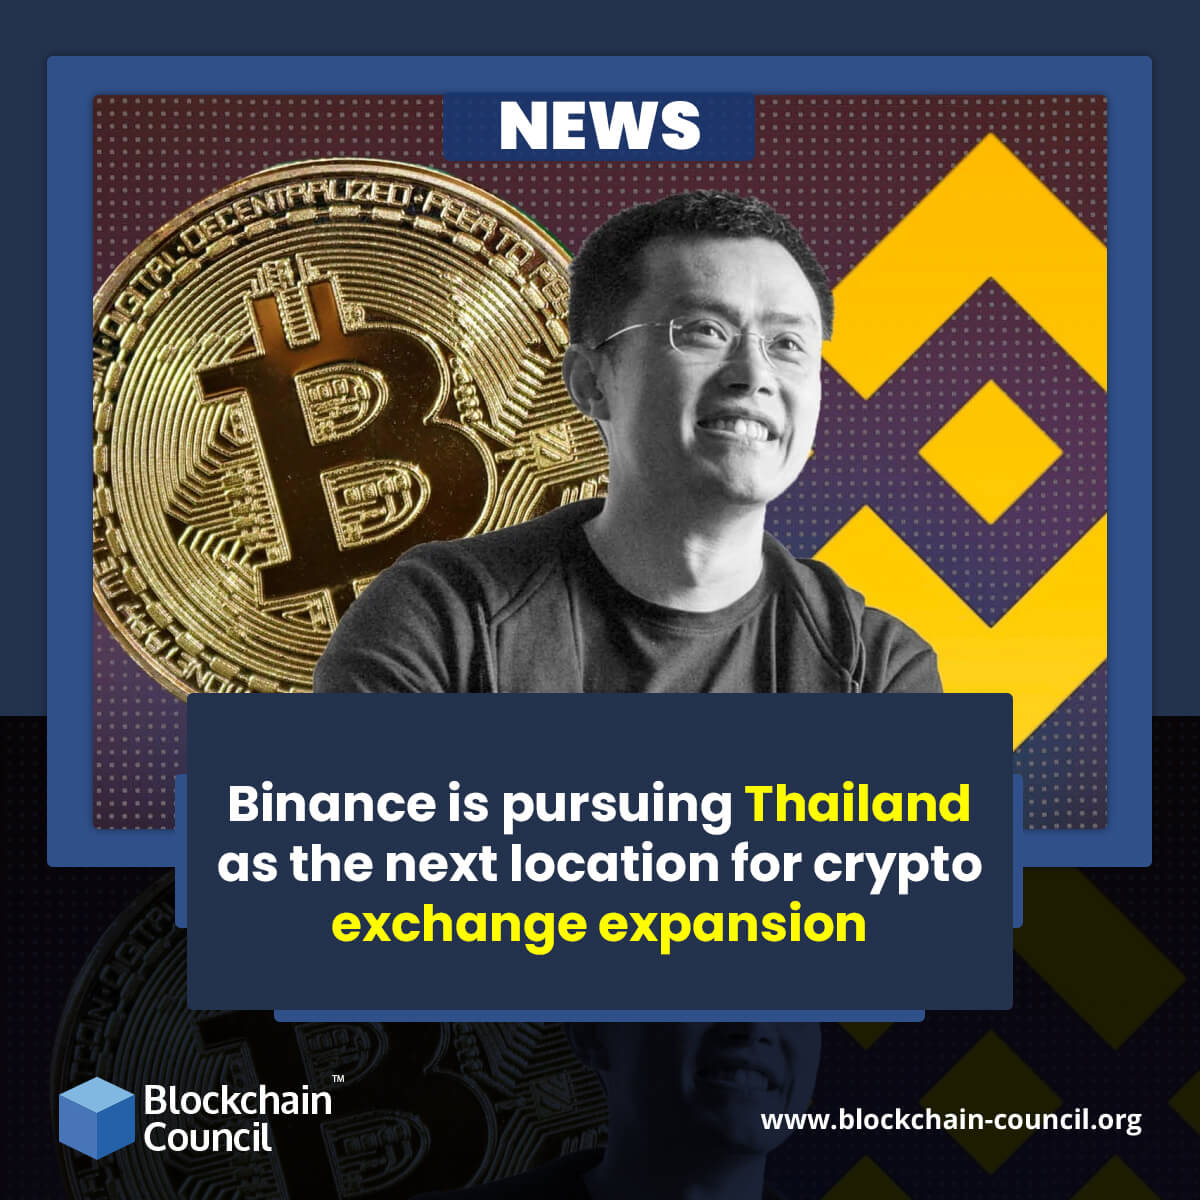 Binance is pursuing Thailand as the next location for crypto exchange expansion